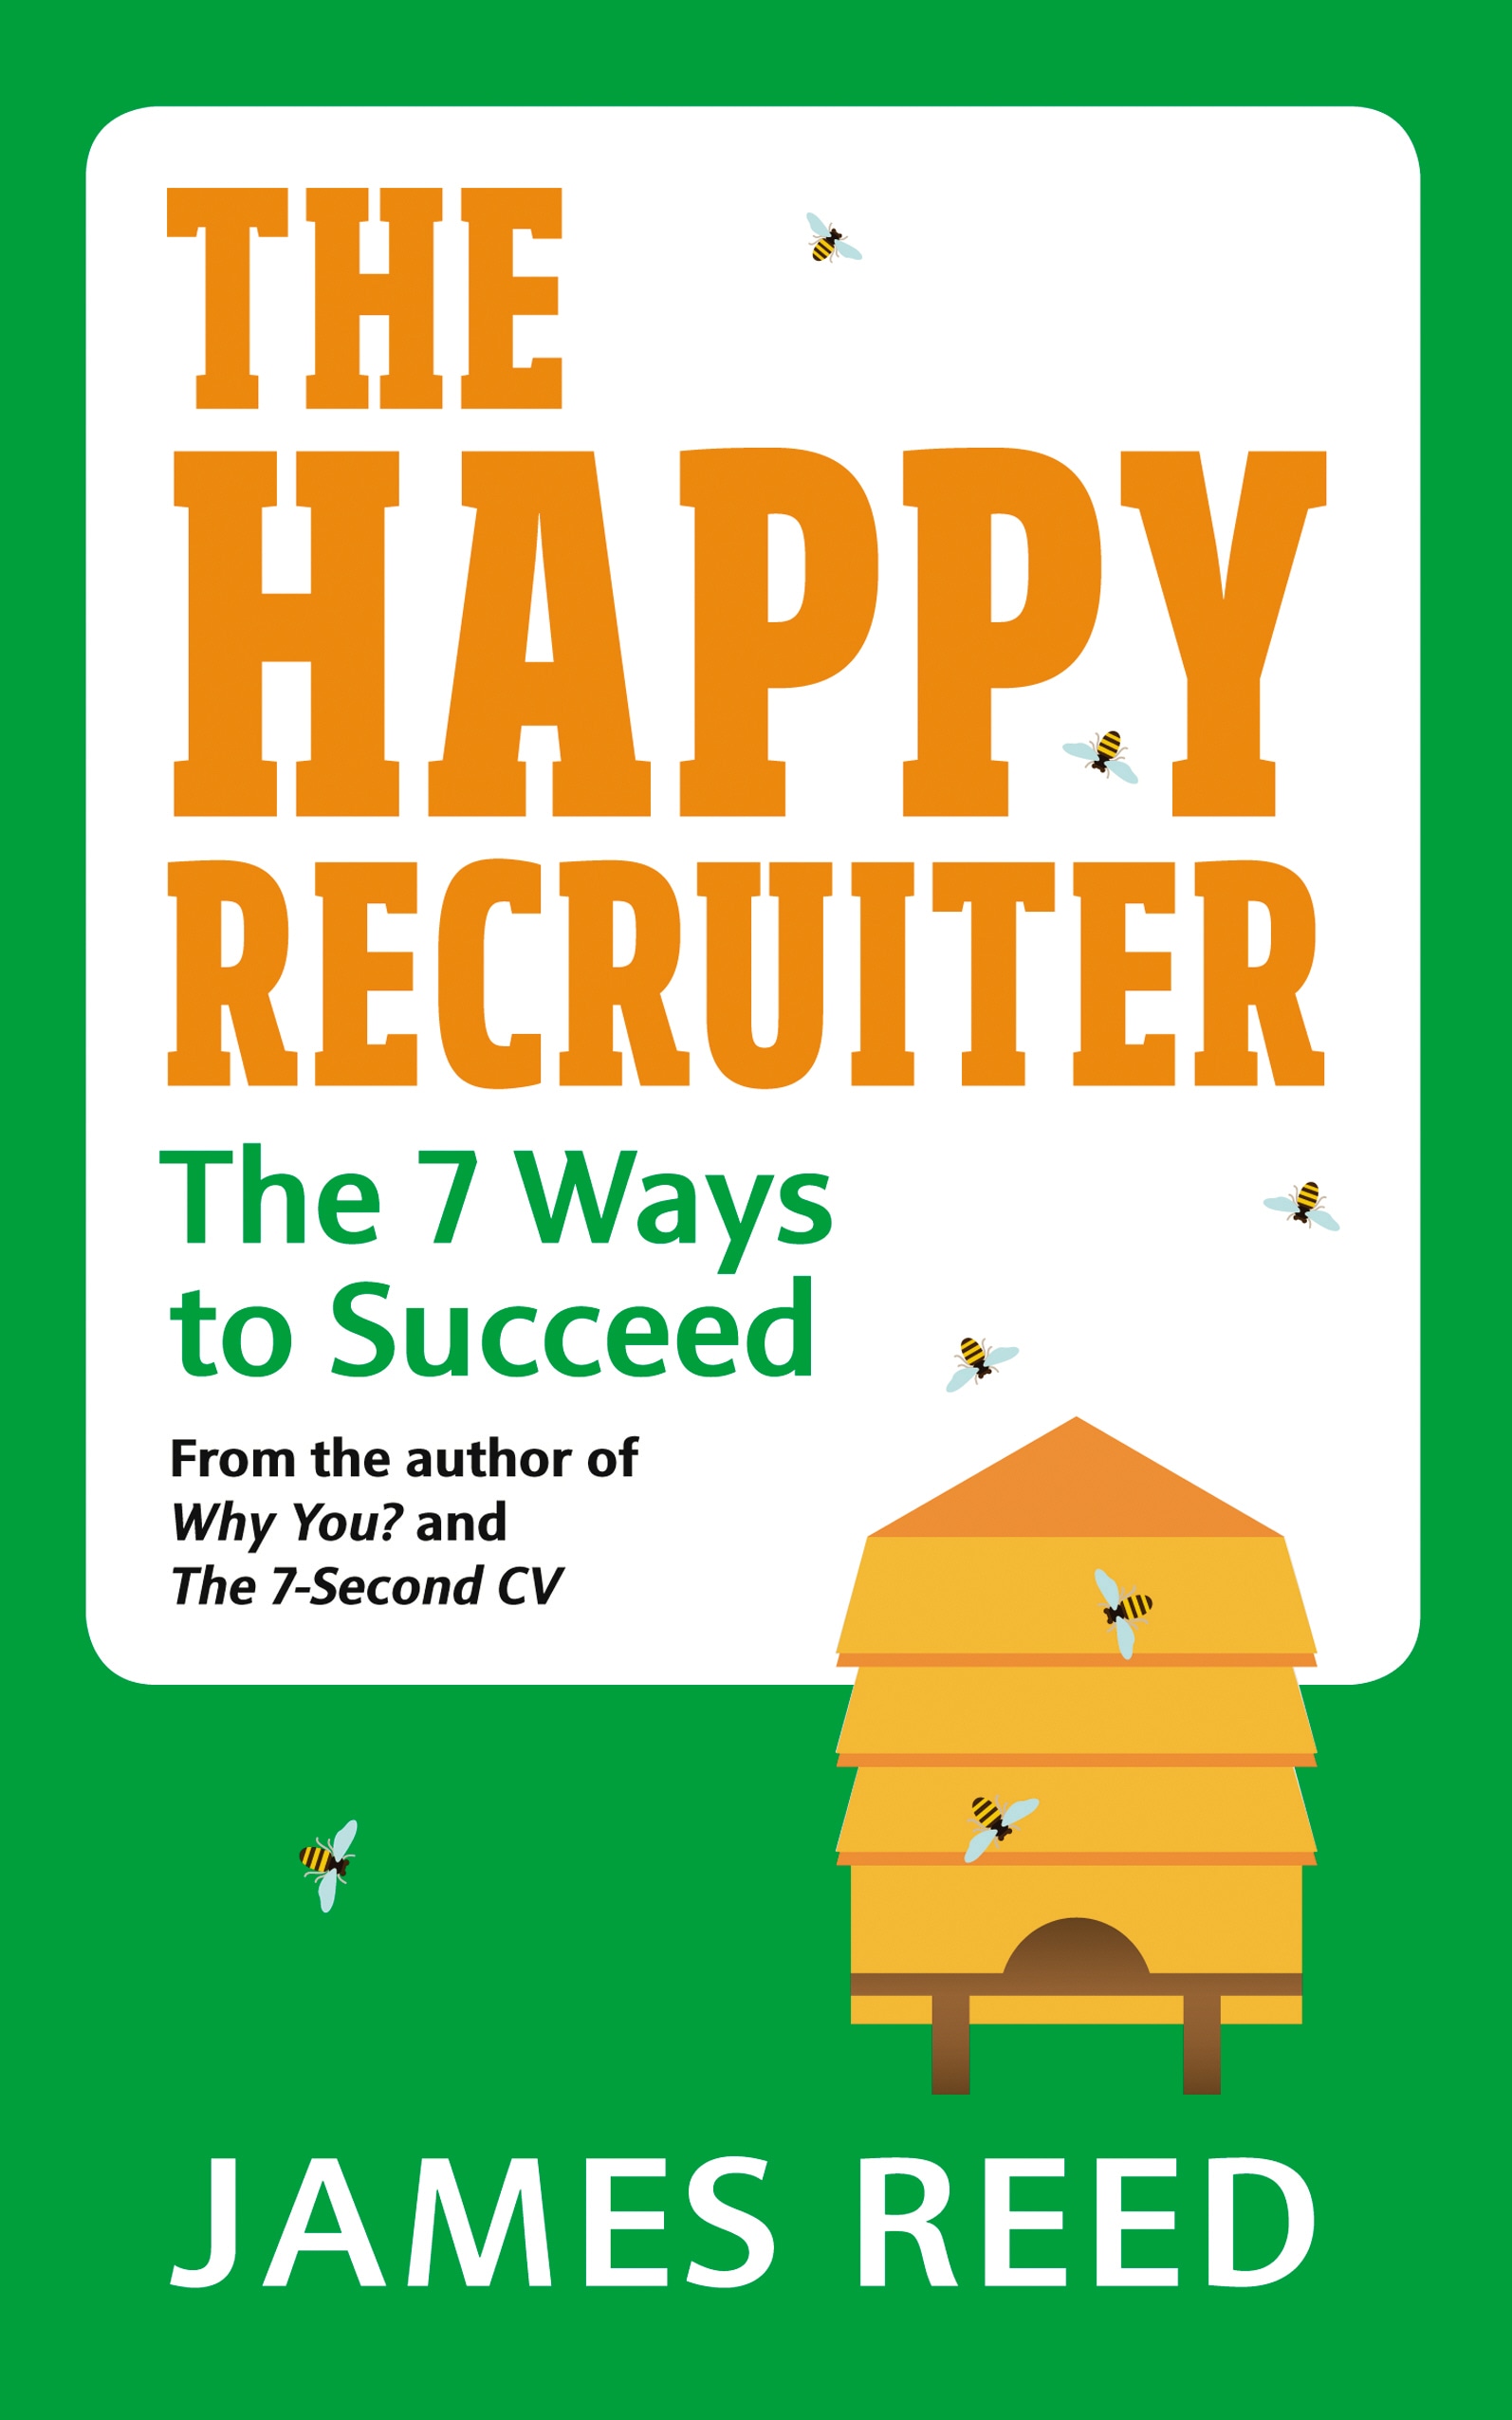 Book “The Happy Recruiter” by James Reed — May 16, 2019